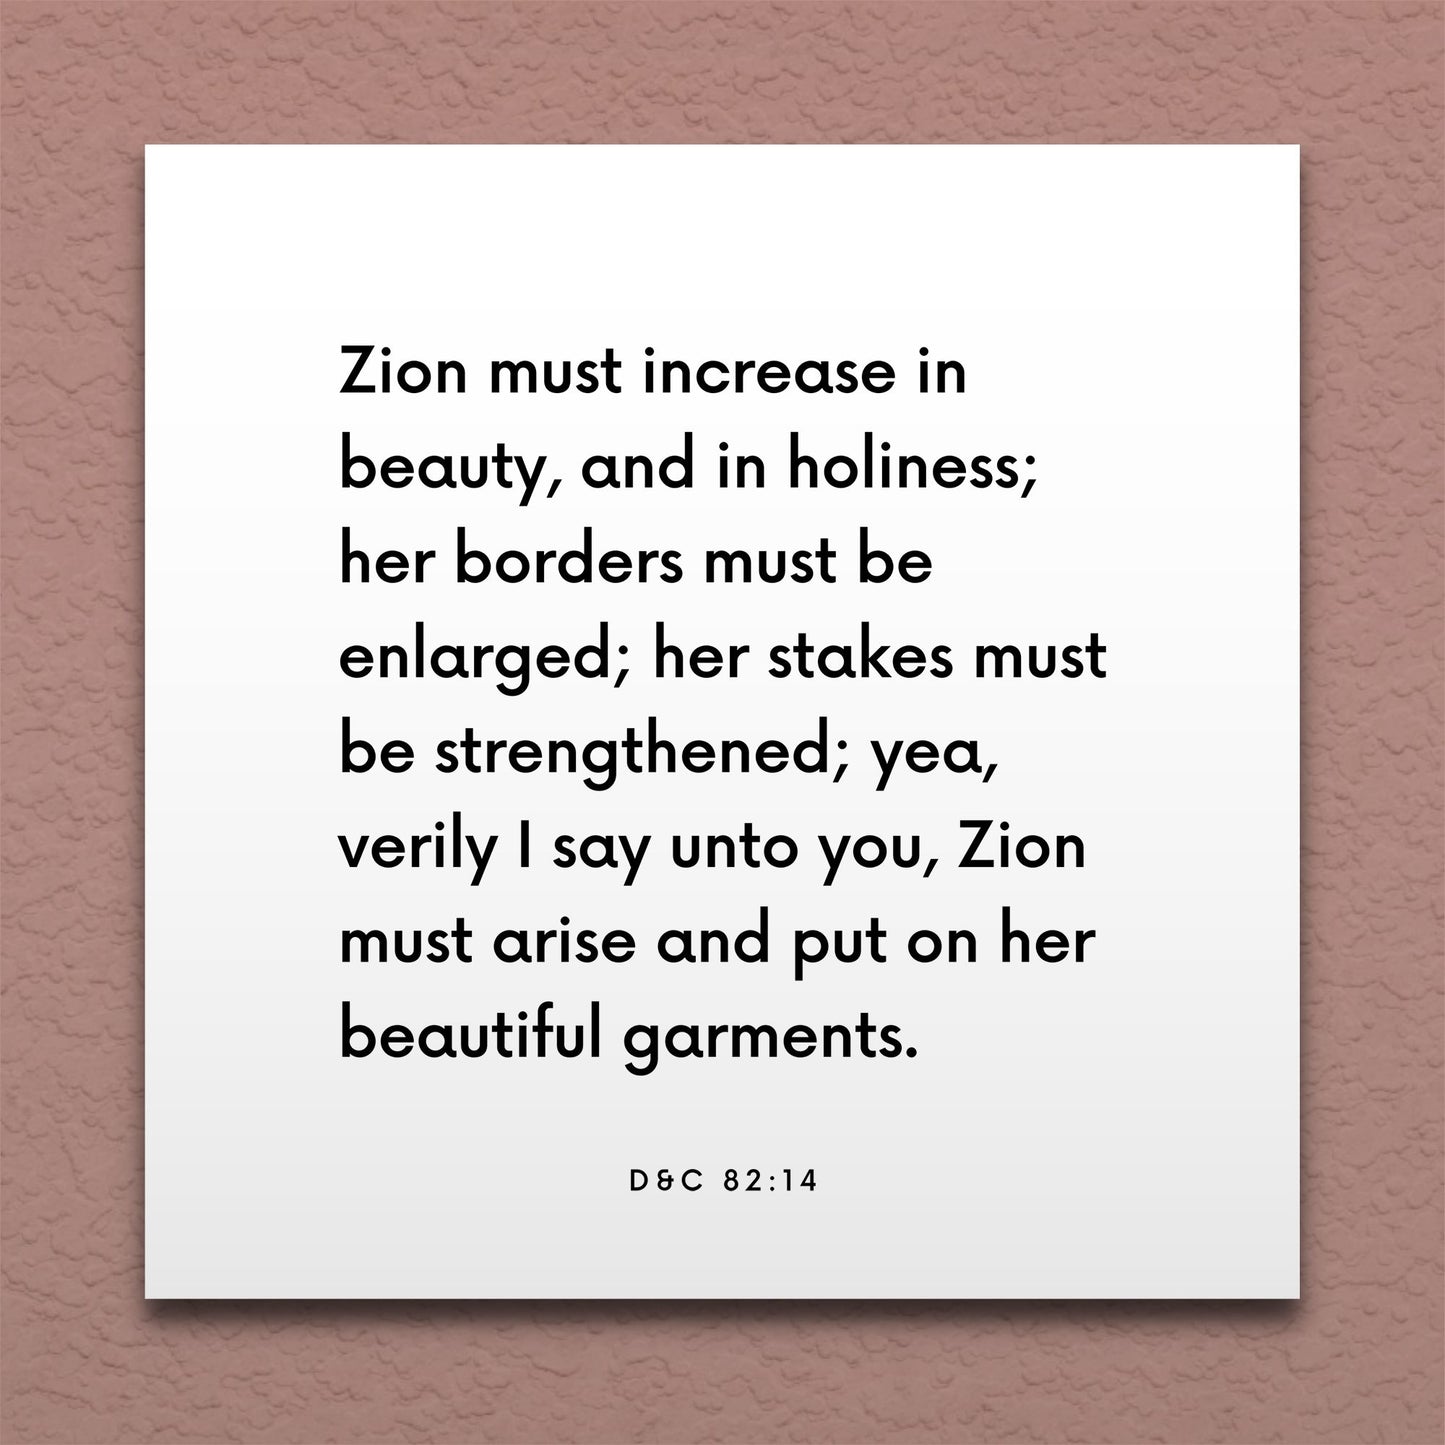 Wall-mounted scripture tile for D&C 82:14 - "Zion must arise and put on her beautiful garments"